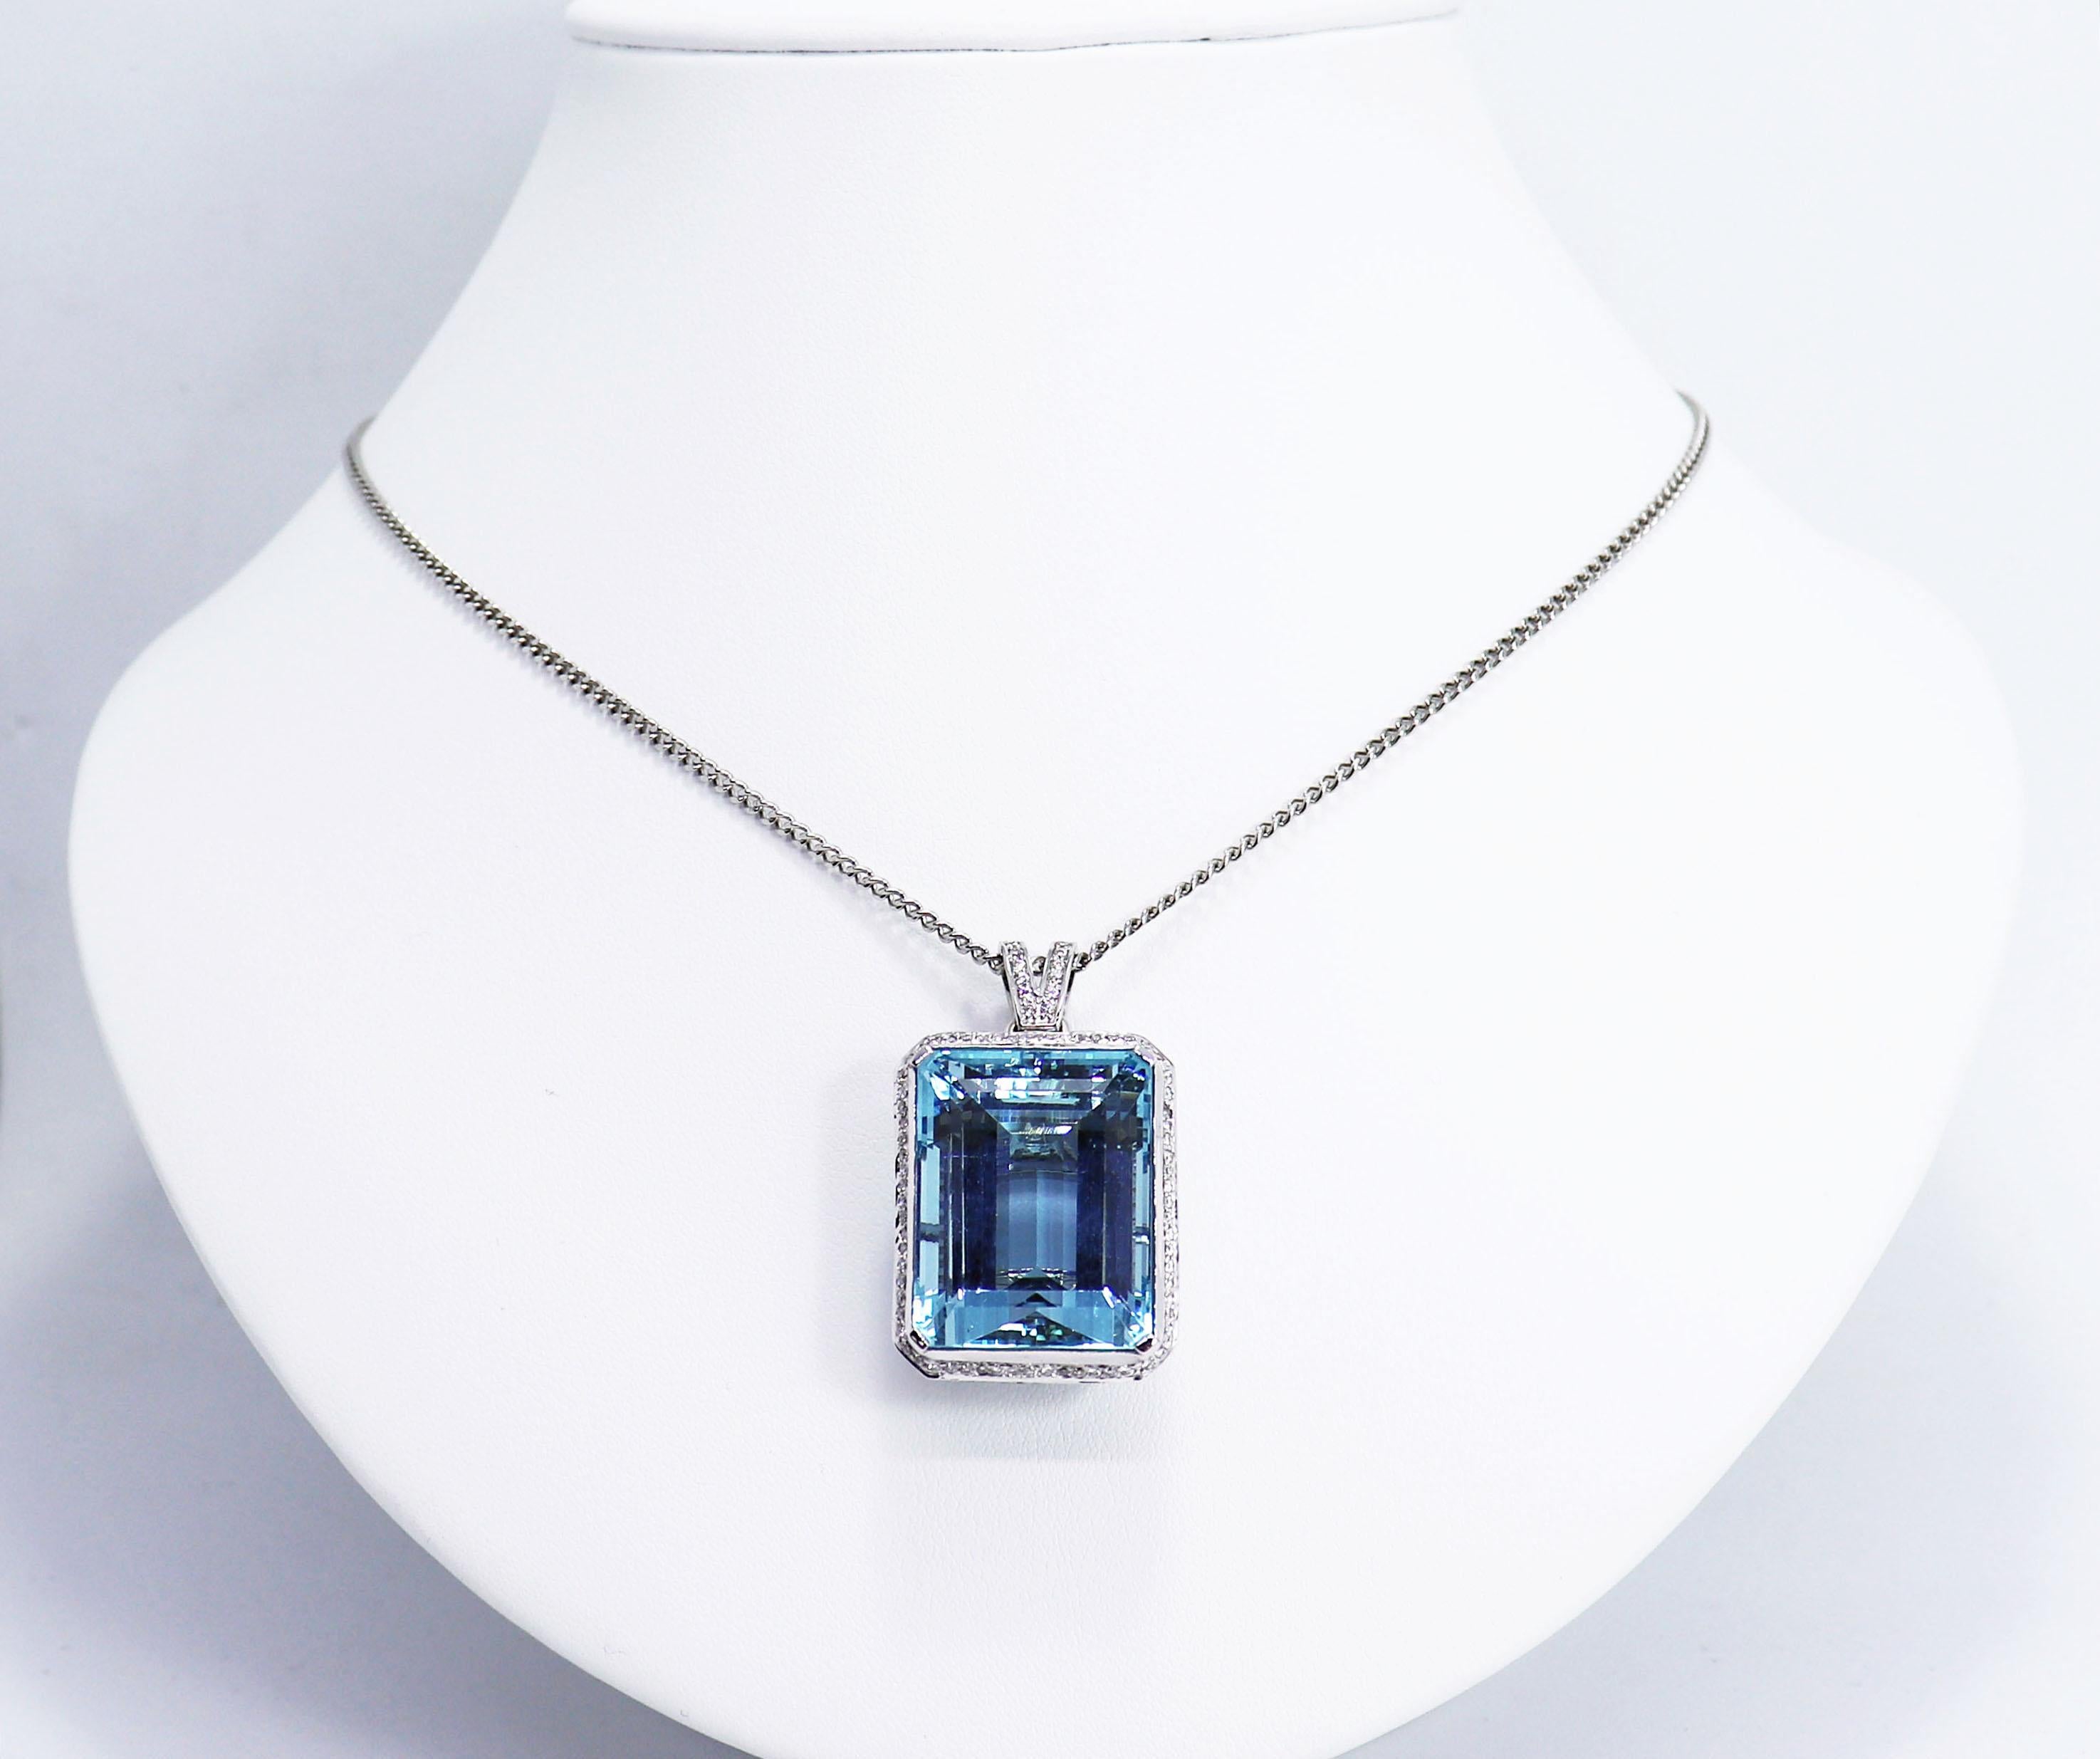 Exquisite pendant set with a high quality intense blue emerald cut aquamarine weighing approximately 39.00 carats. The beautiful stone has been set in a four claw open work fancy basket mount set with approximately 1.12 carats of brilliant cut